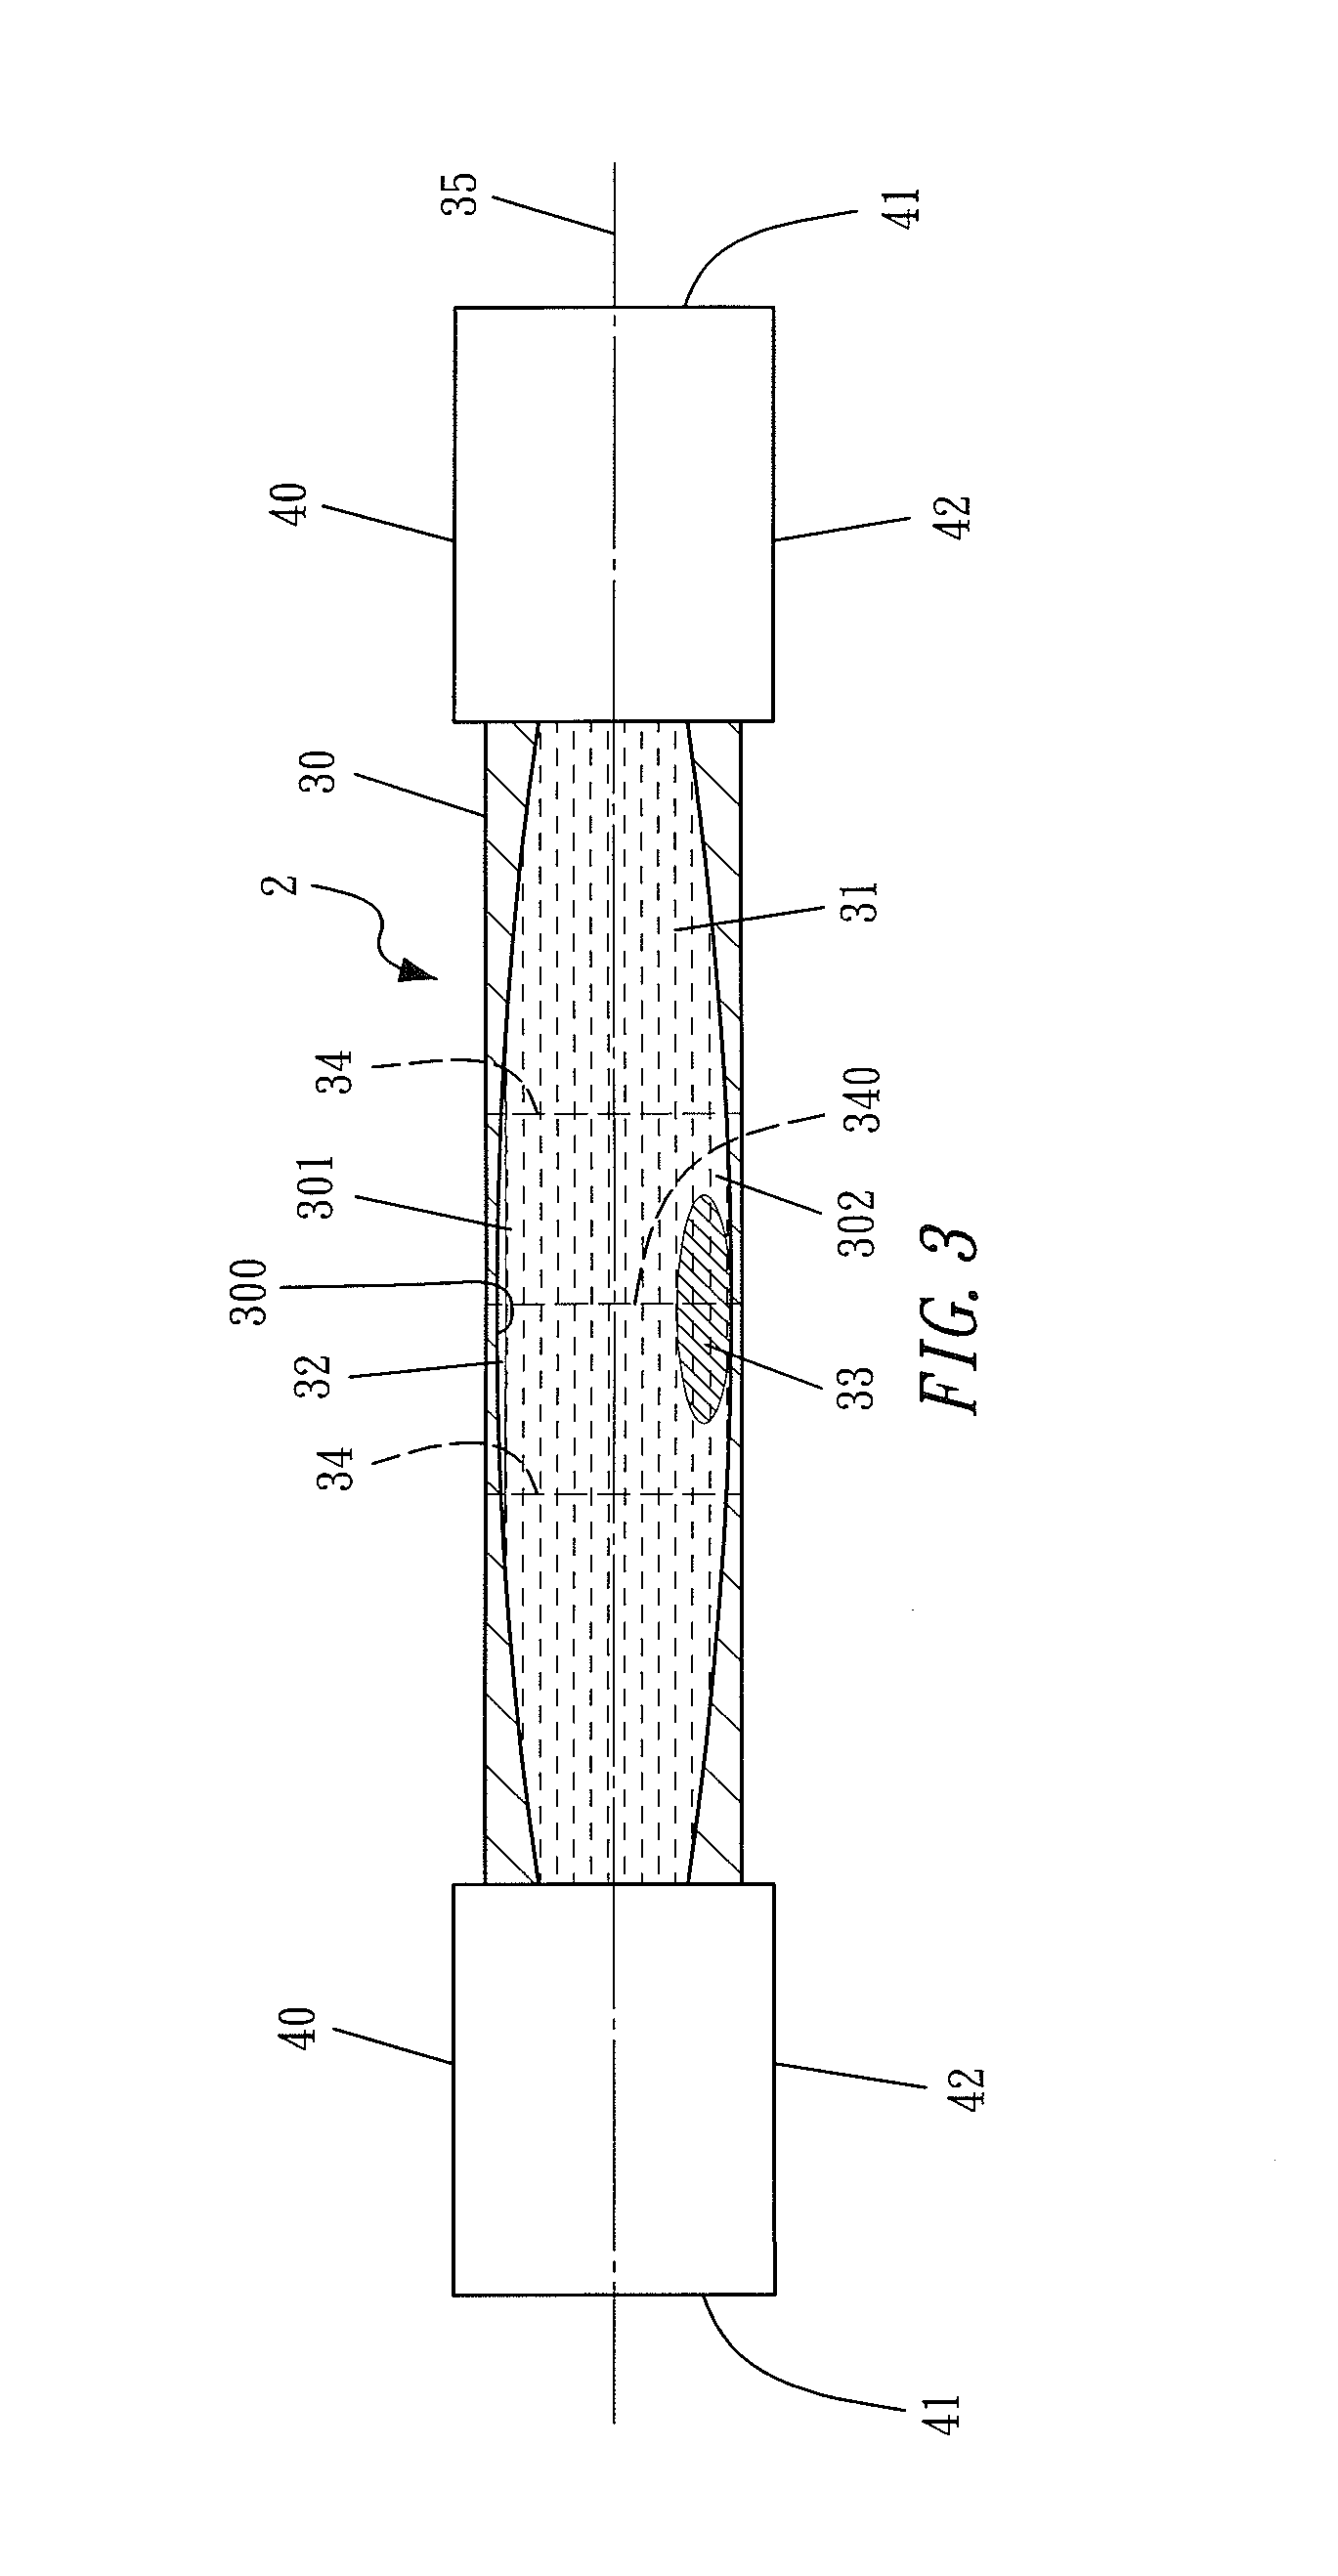 Double-bead Horizontal and Vertical Spirit Level, Apparatus Using The Spirit Level, and Method of Measuring Distance and Height by Using The Apparatus